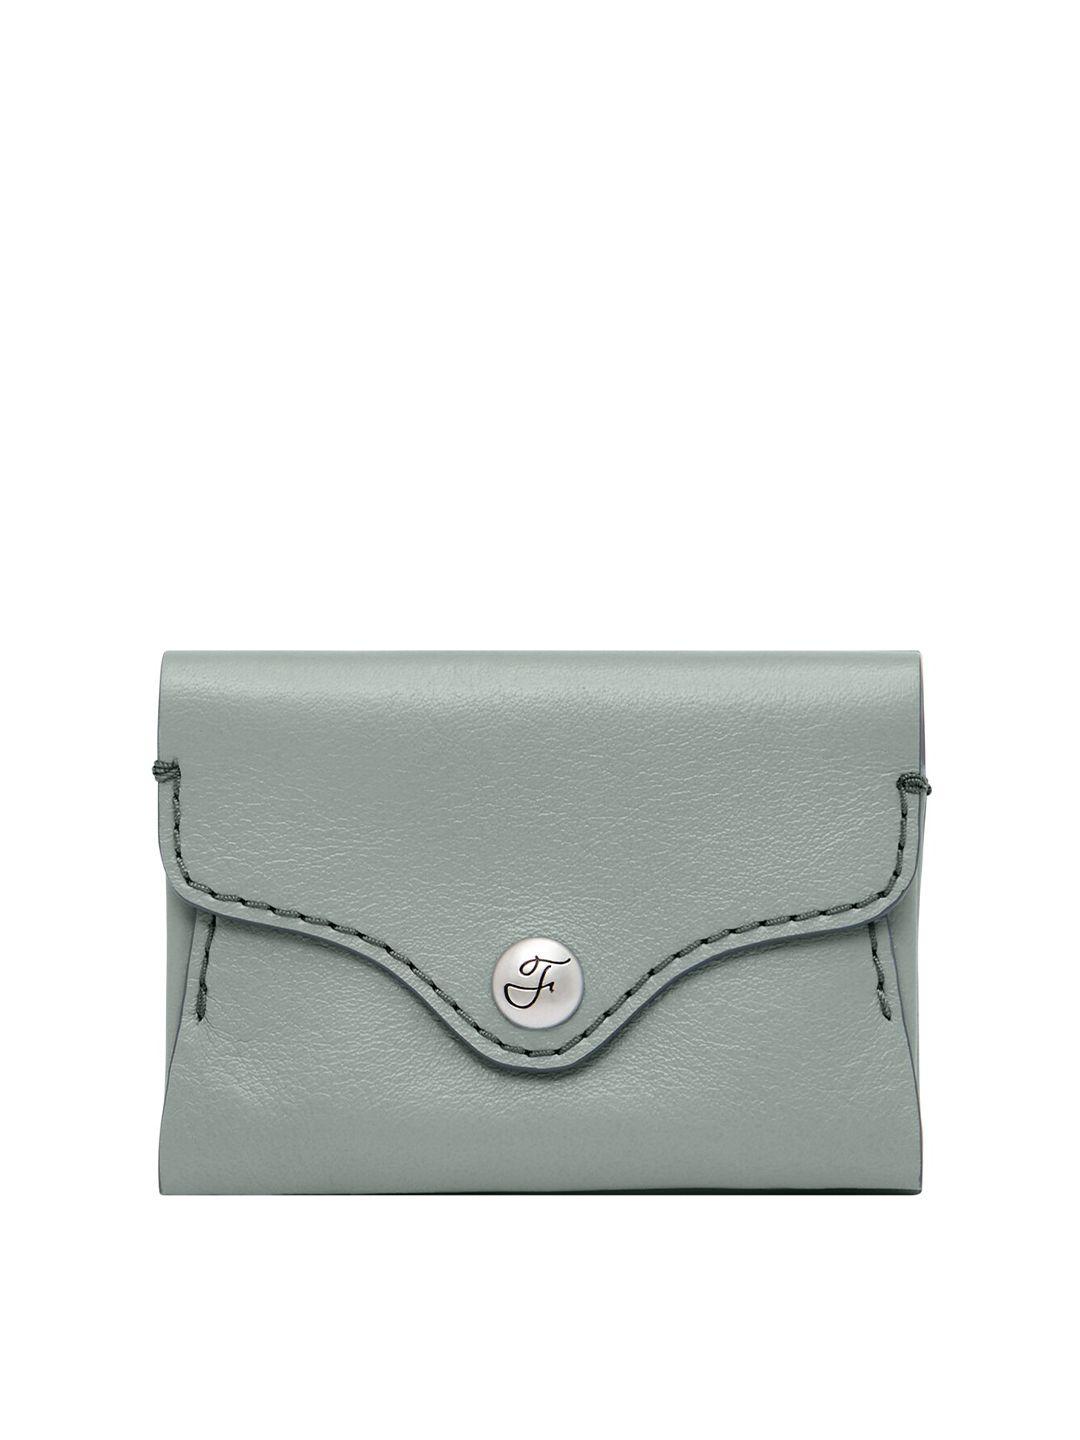 fossil women leather envelope